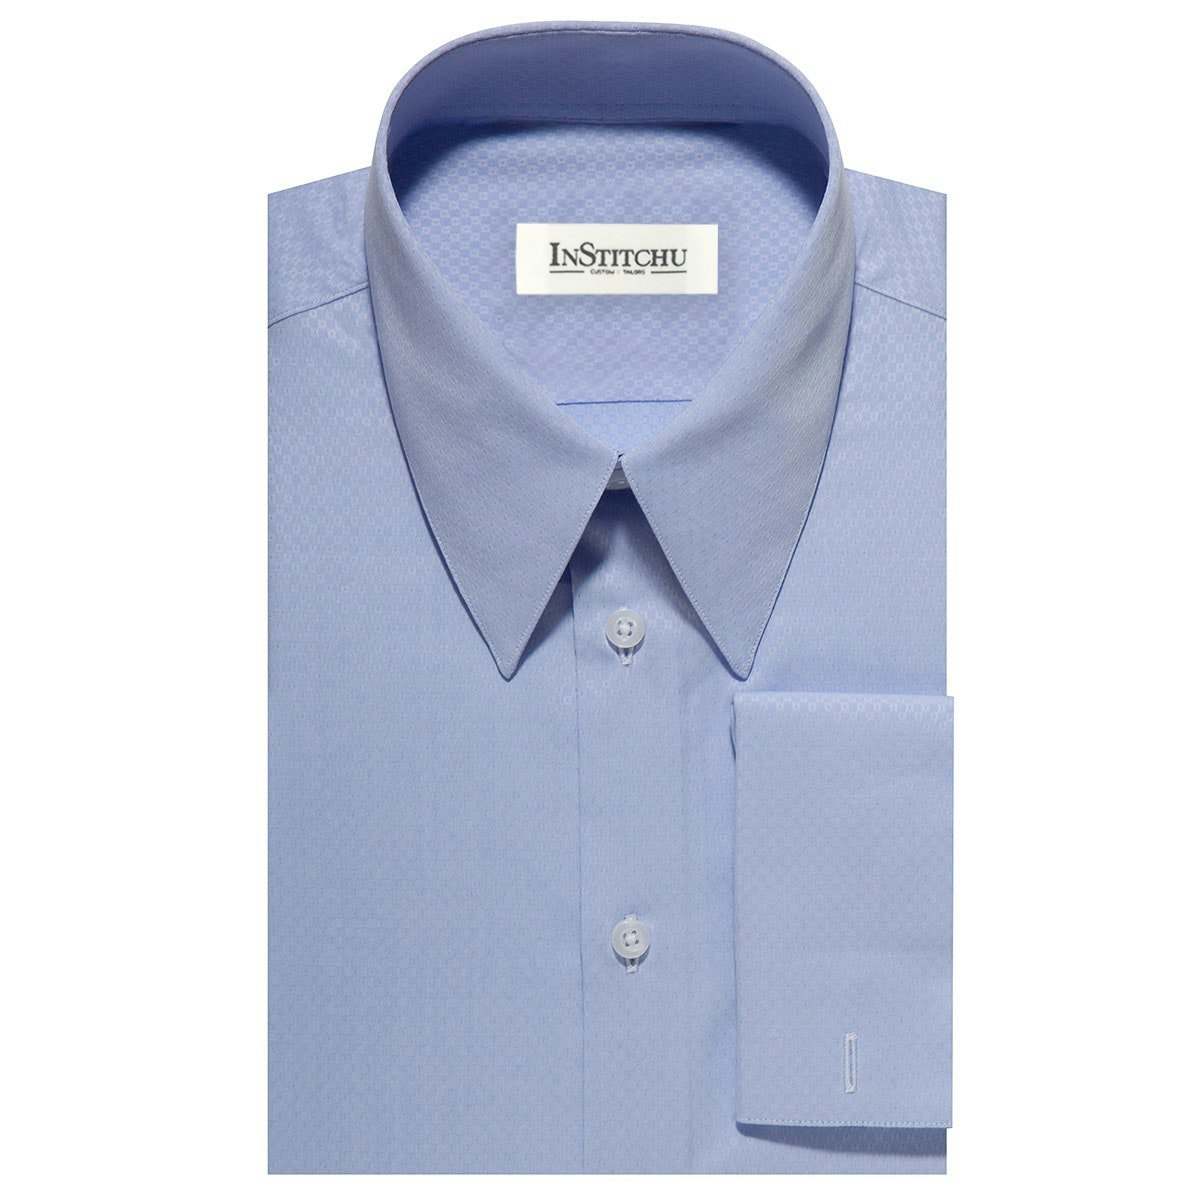 InStitchu Collection The Shores Blue Shirt